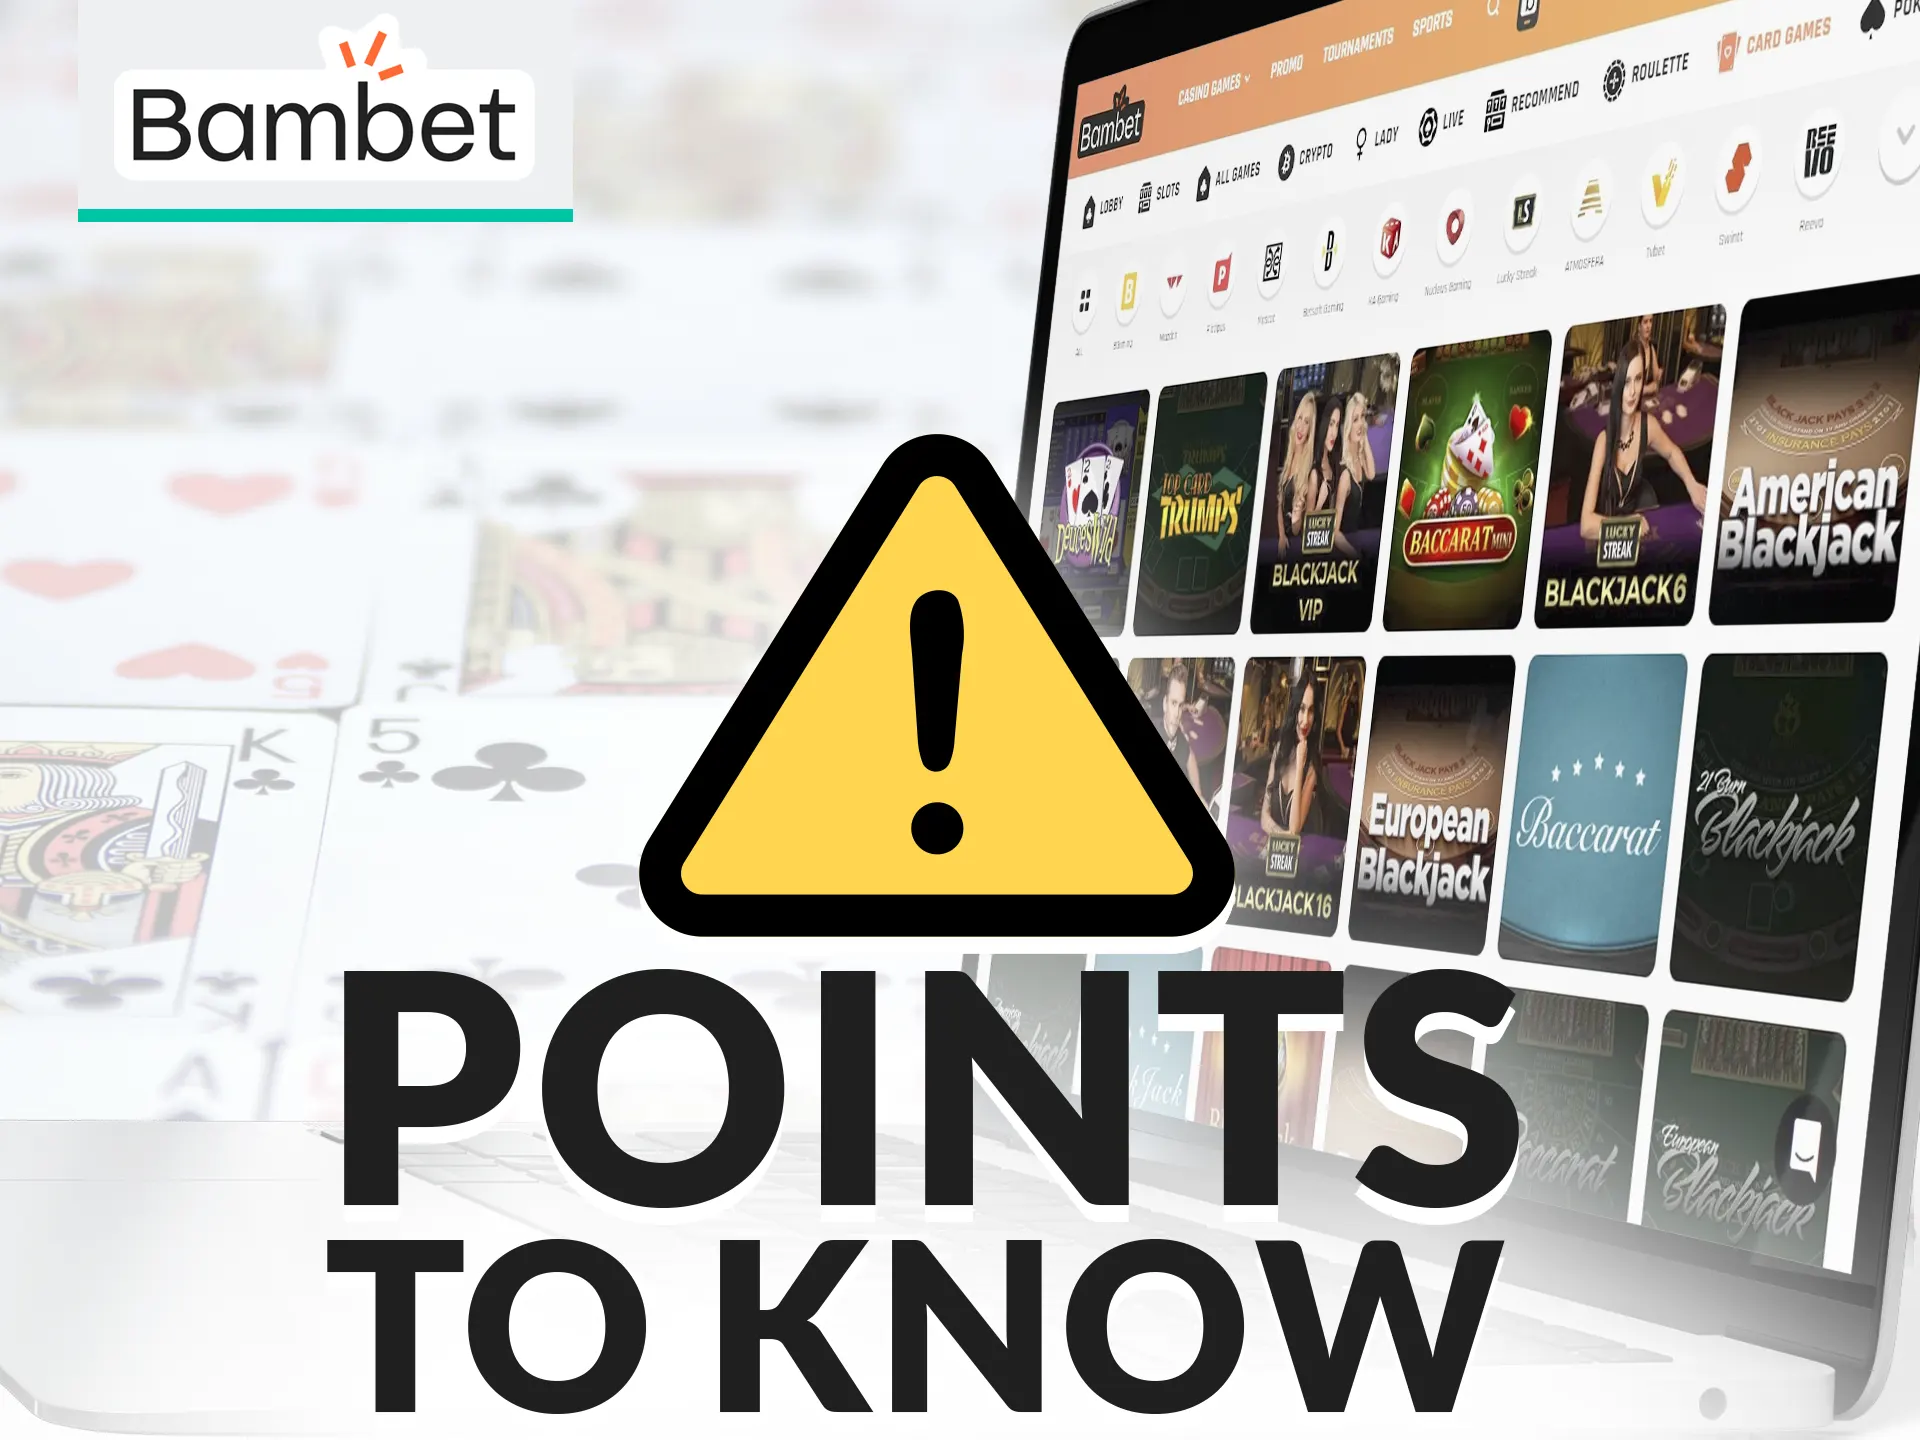 Check out the important information about card games on the Bambet website.